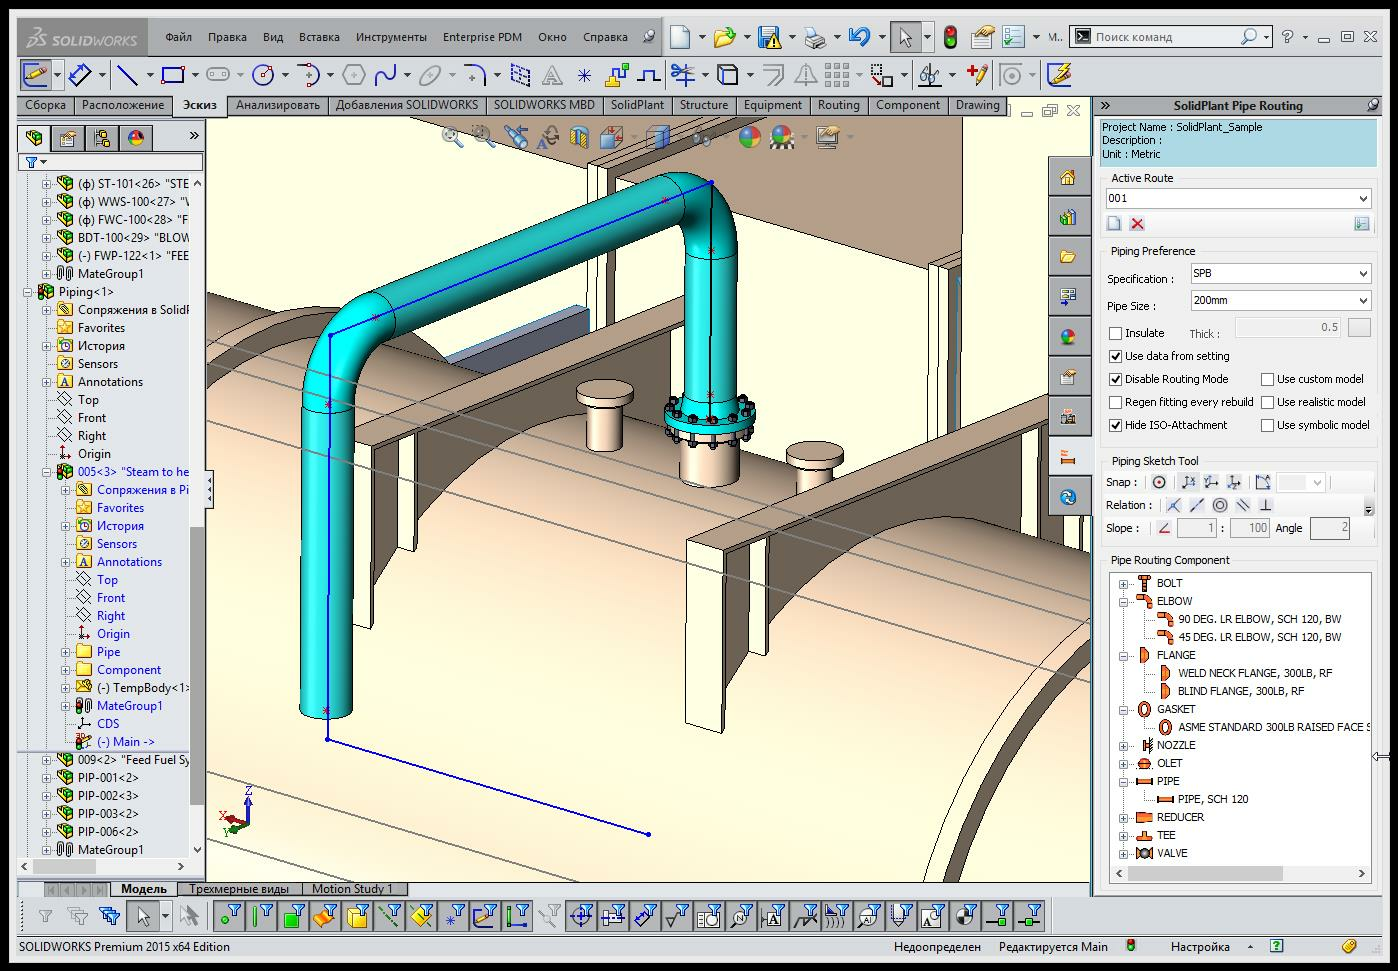 solidworks 2017 free download for windows 10